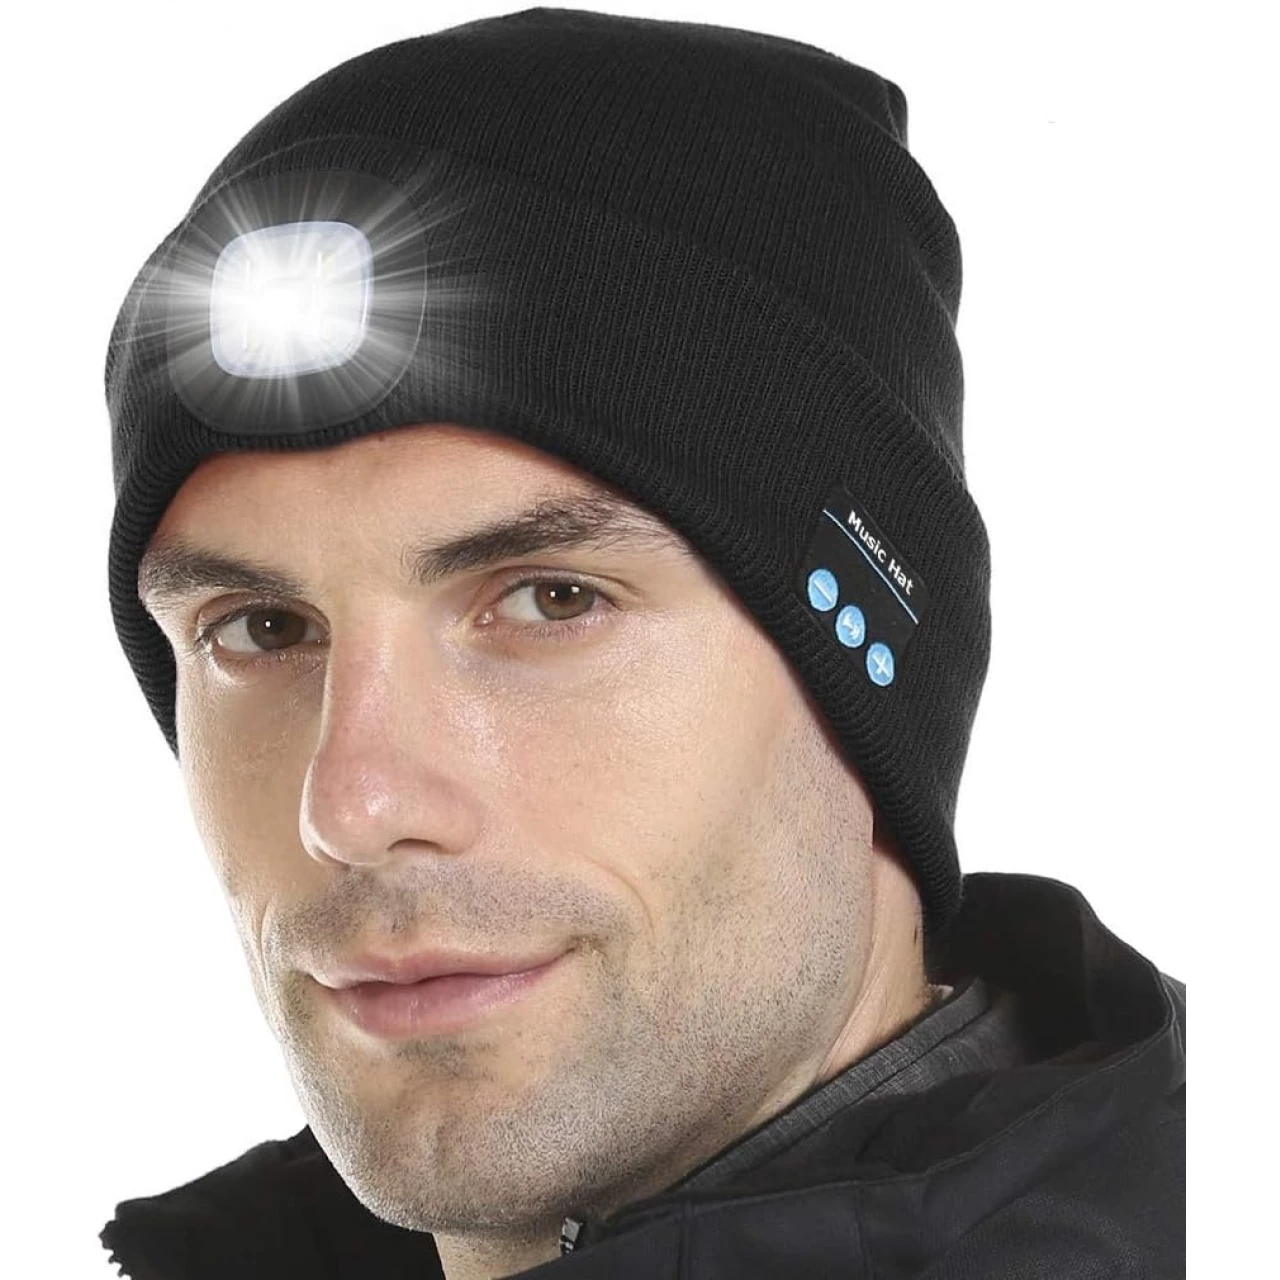 Bluetooth Beanie Hat with Light, Unisex LED Cap with Headphones Built-in Stereo Speakers &amp; Mic, Tech Gift for Men Women Dad Black